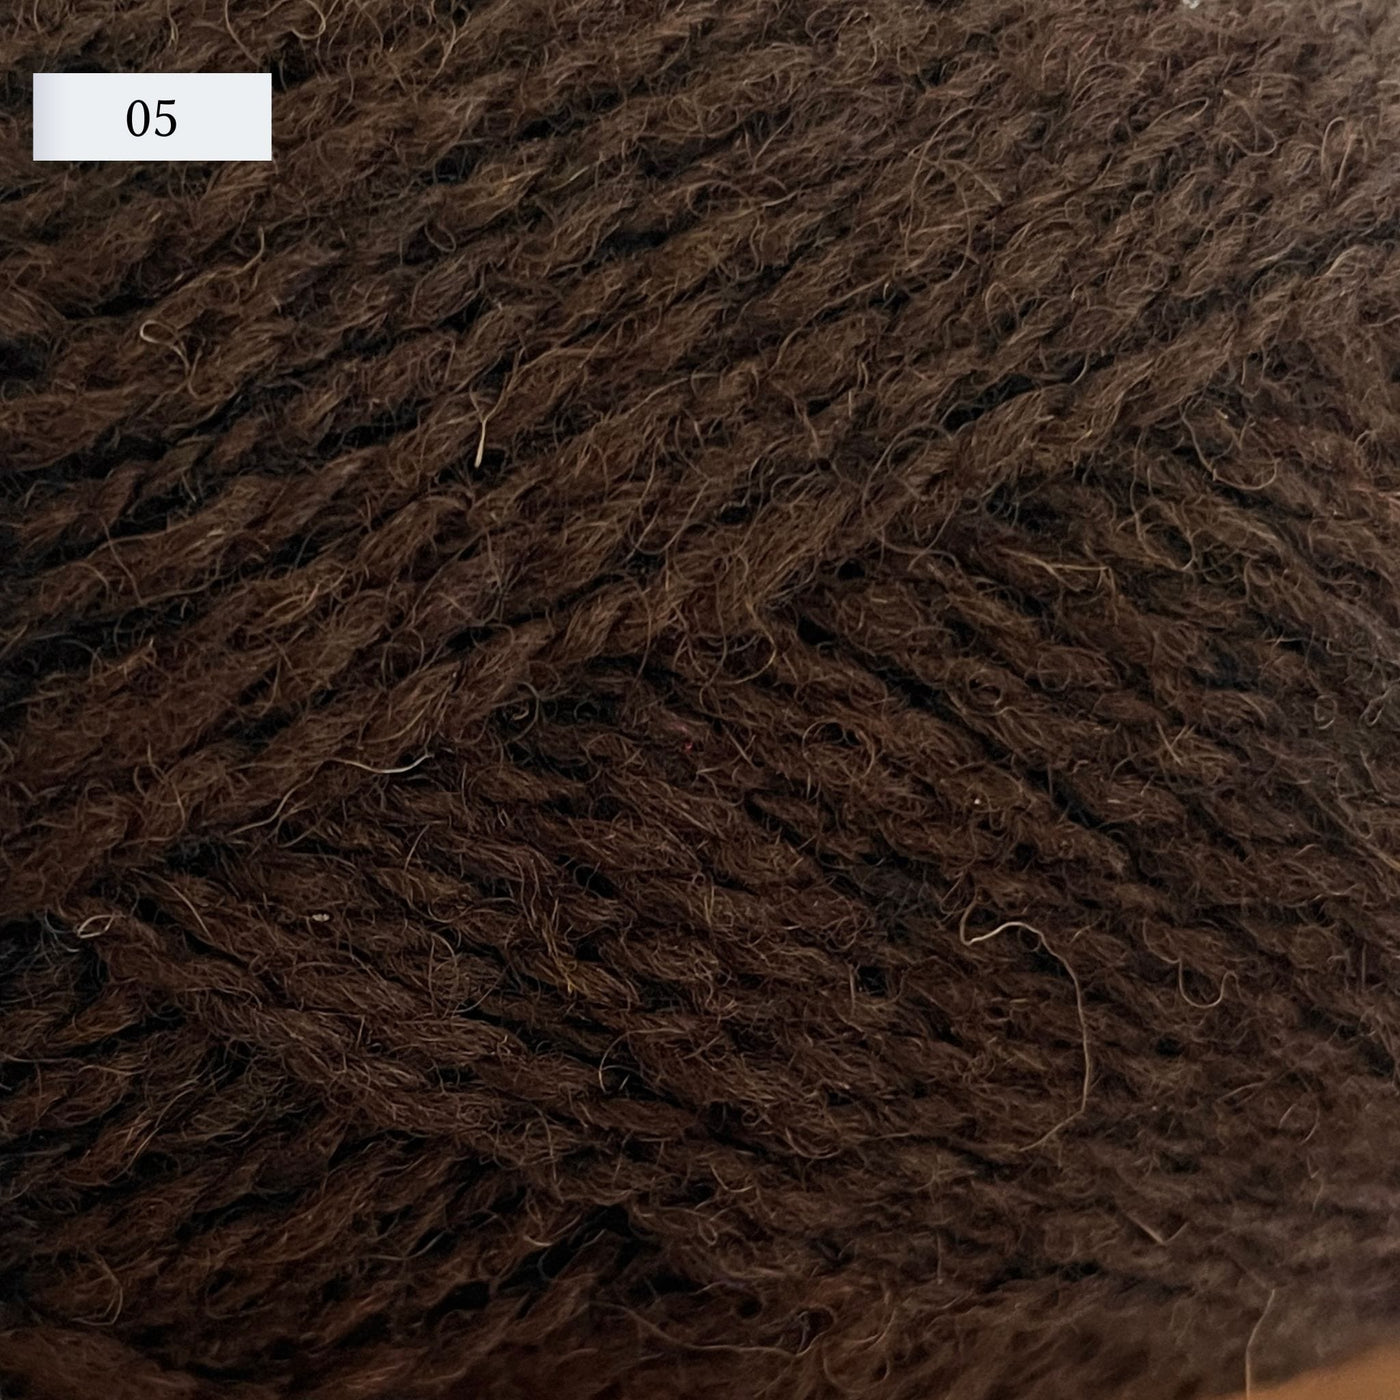  Pllieay Dark Brown Yarn For Crocheting And Knitting